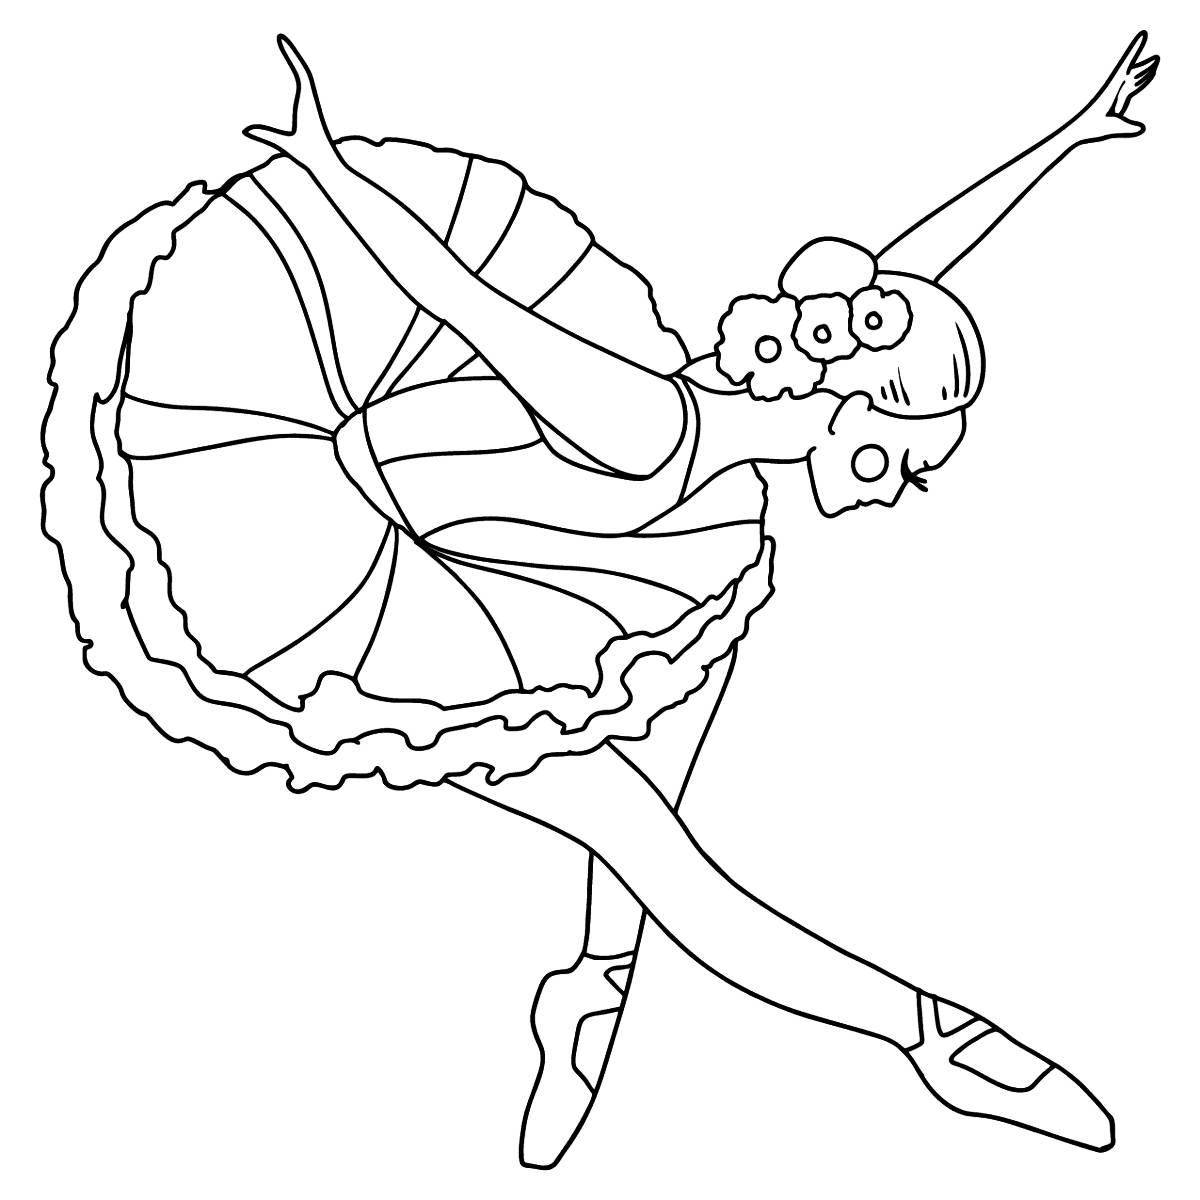 Animated barbie gymnast coloring book